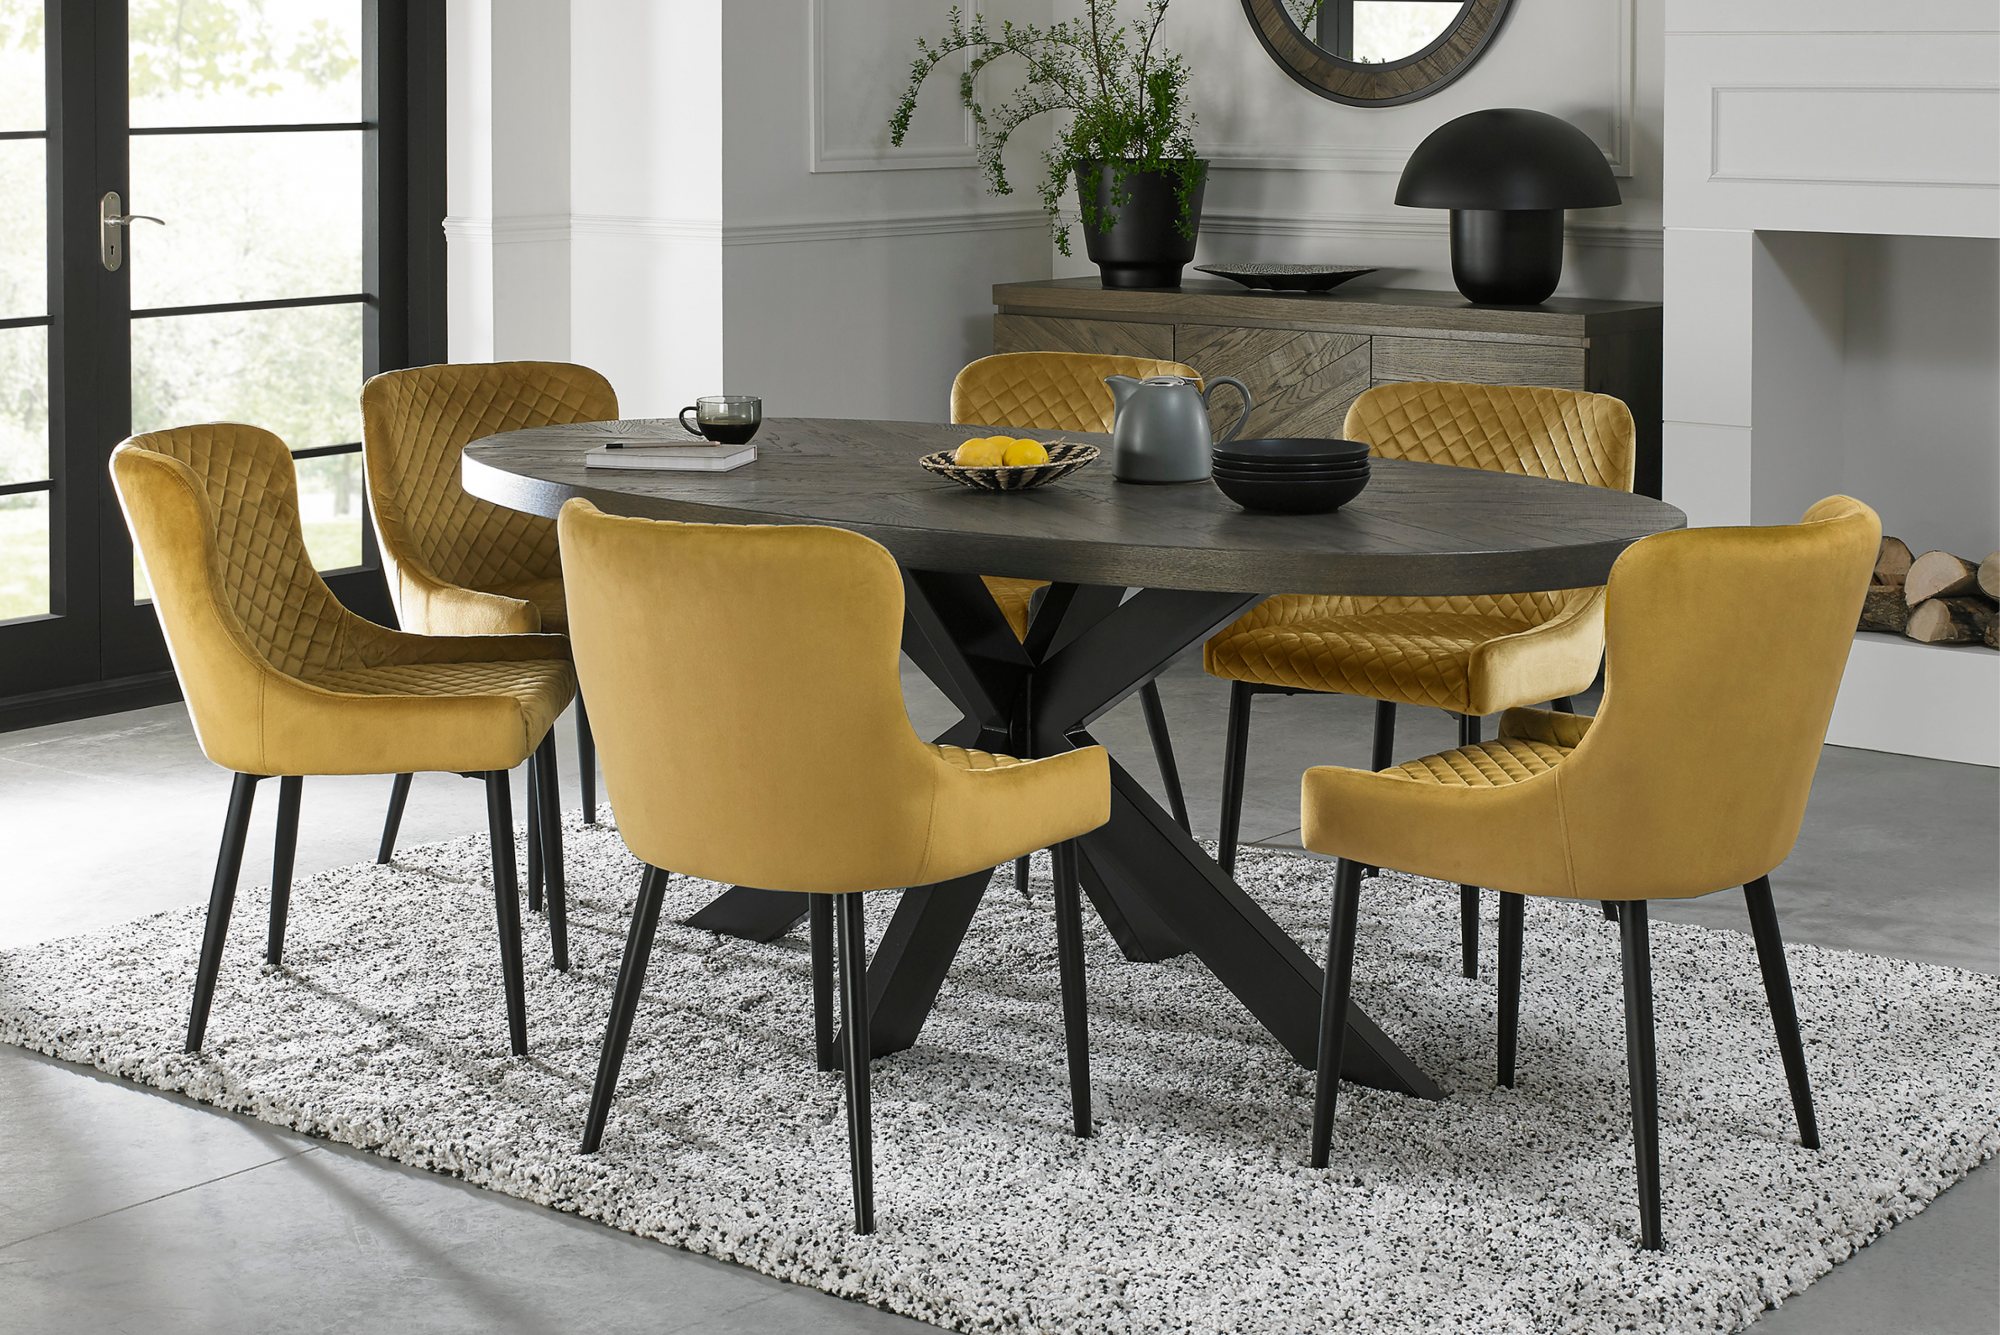 Home Origins Bosco fumed oak 6 seater dining table with 6 Cezanne chairs- mustard velvet fabric